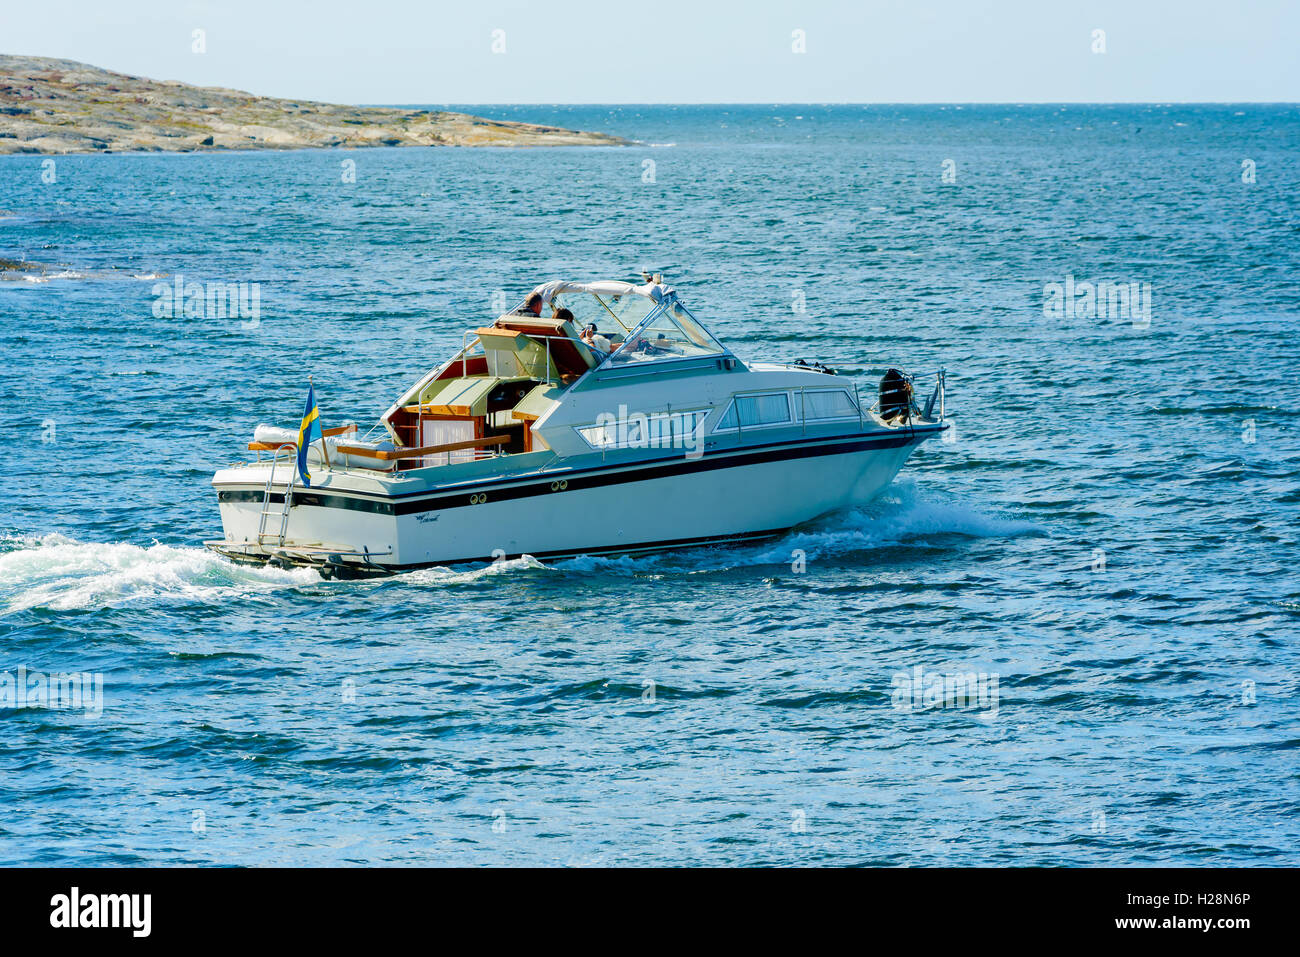 Mollosund, Sweden - September 9, 2016: Environmental documentary of motorboat leaving for a trip in the archipelago. Stock Photo